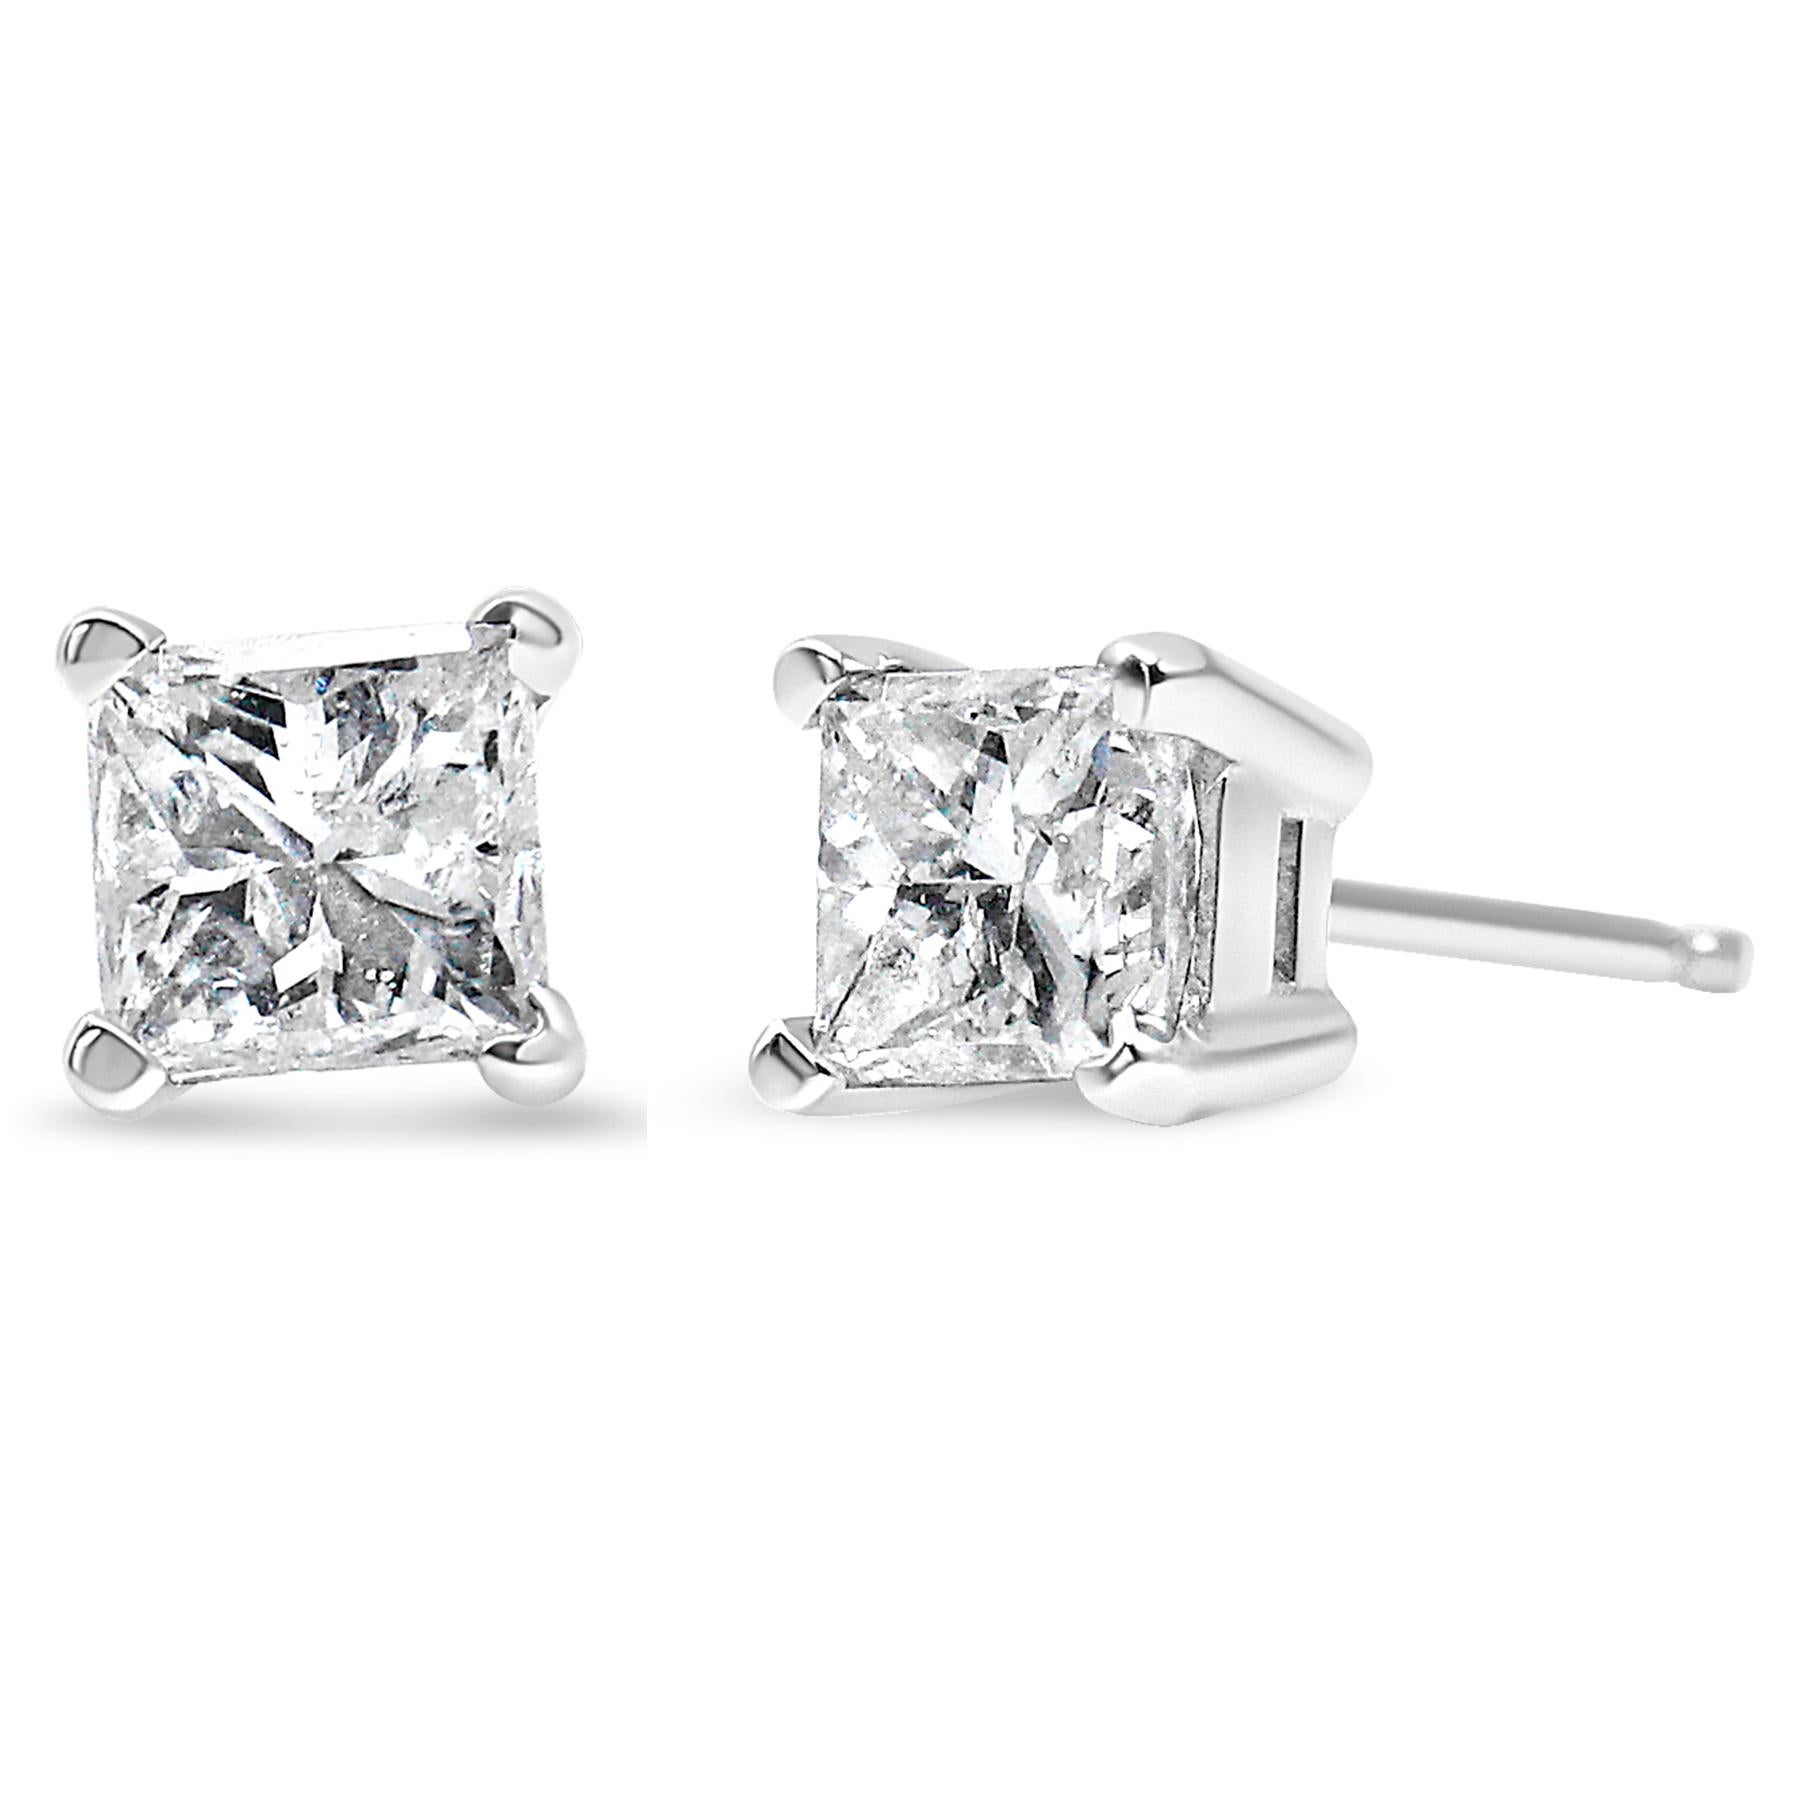 AGS Certified 14K White Gold 1.0 Cttw Princess-Cut Solitaire Diamond Earrings For Sale 2